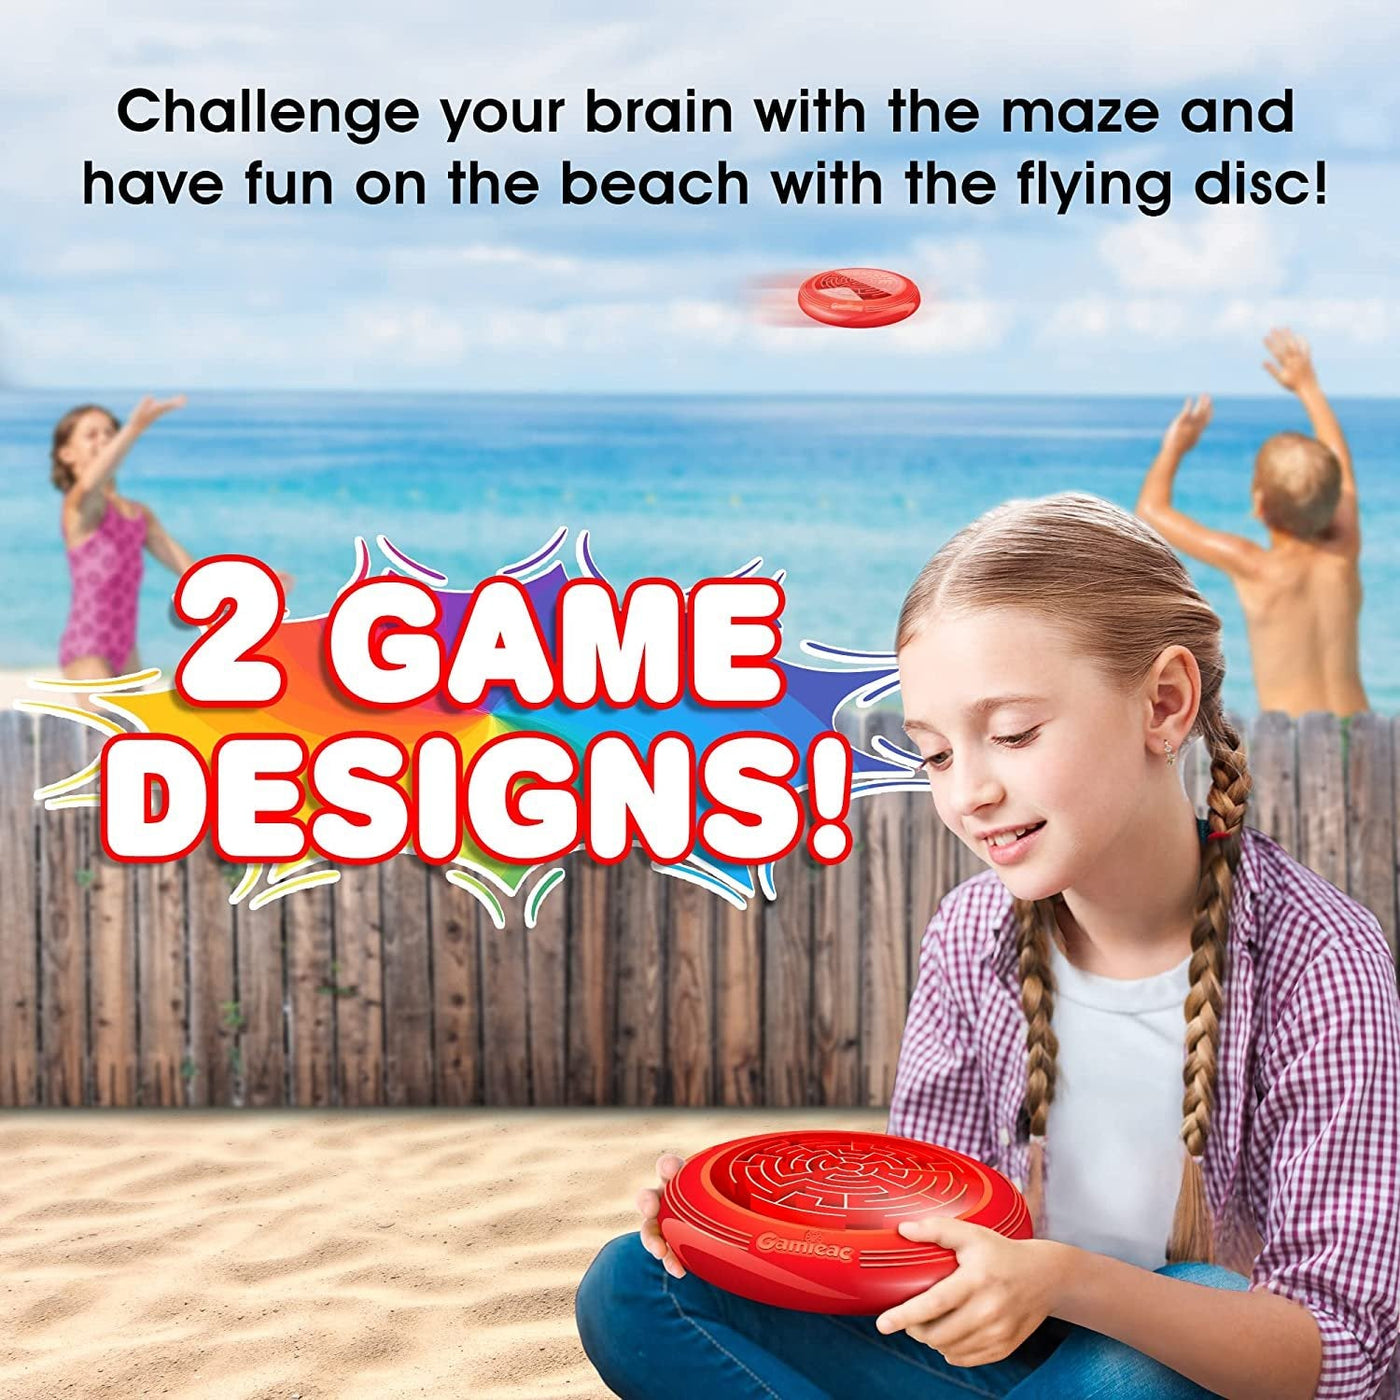 Flying Maze, 2 in 1 Game Set, Outdoor Flying Disc with Ball Maze Inside. Works as Both Indoor & Outdoor Toy for Kids, Great for Backyard, Beach, & Inside Fun, Official Size & Weight: 9” - 175g